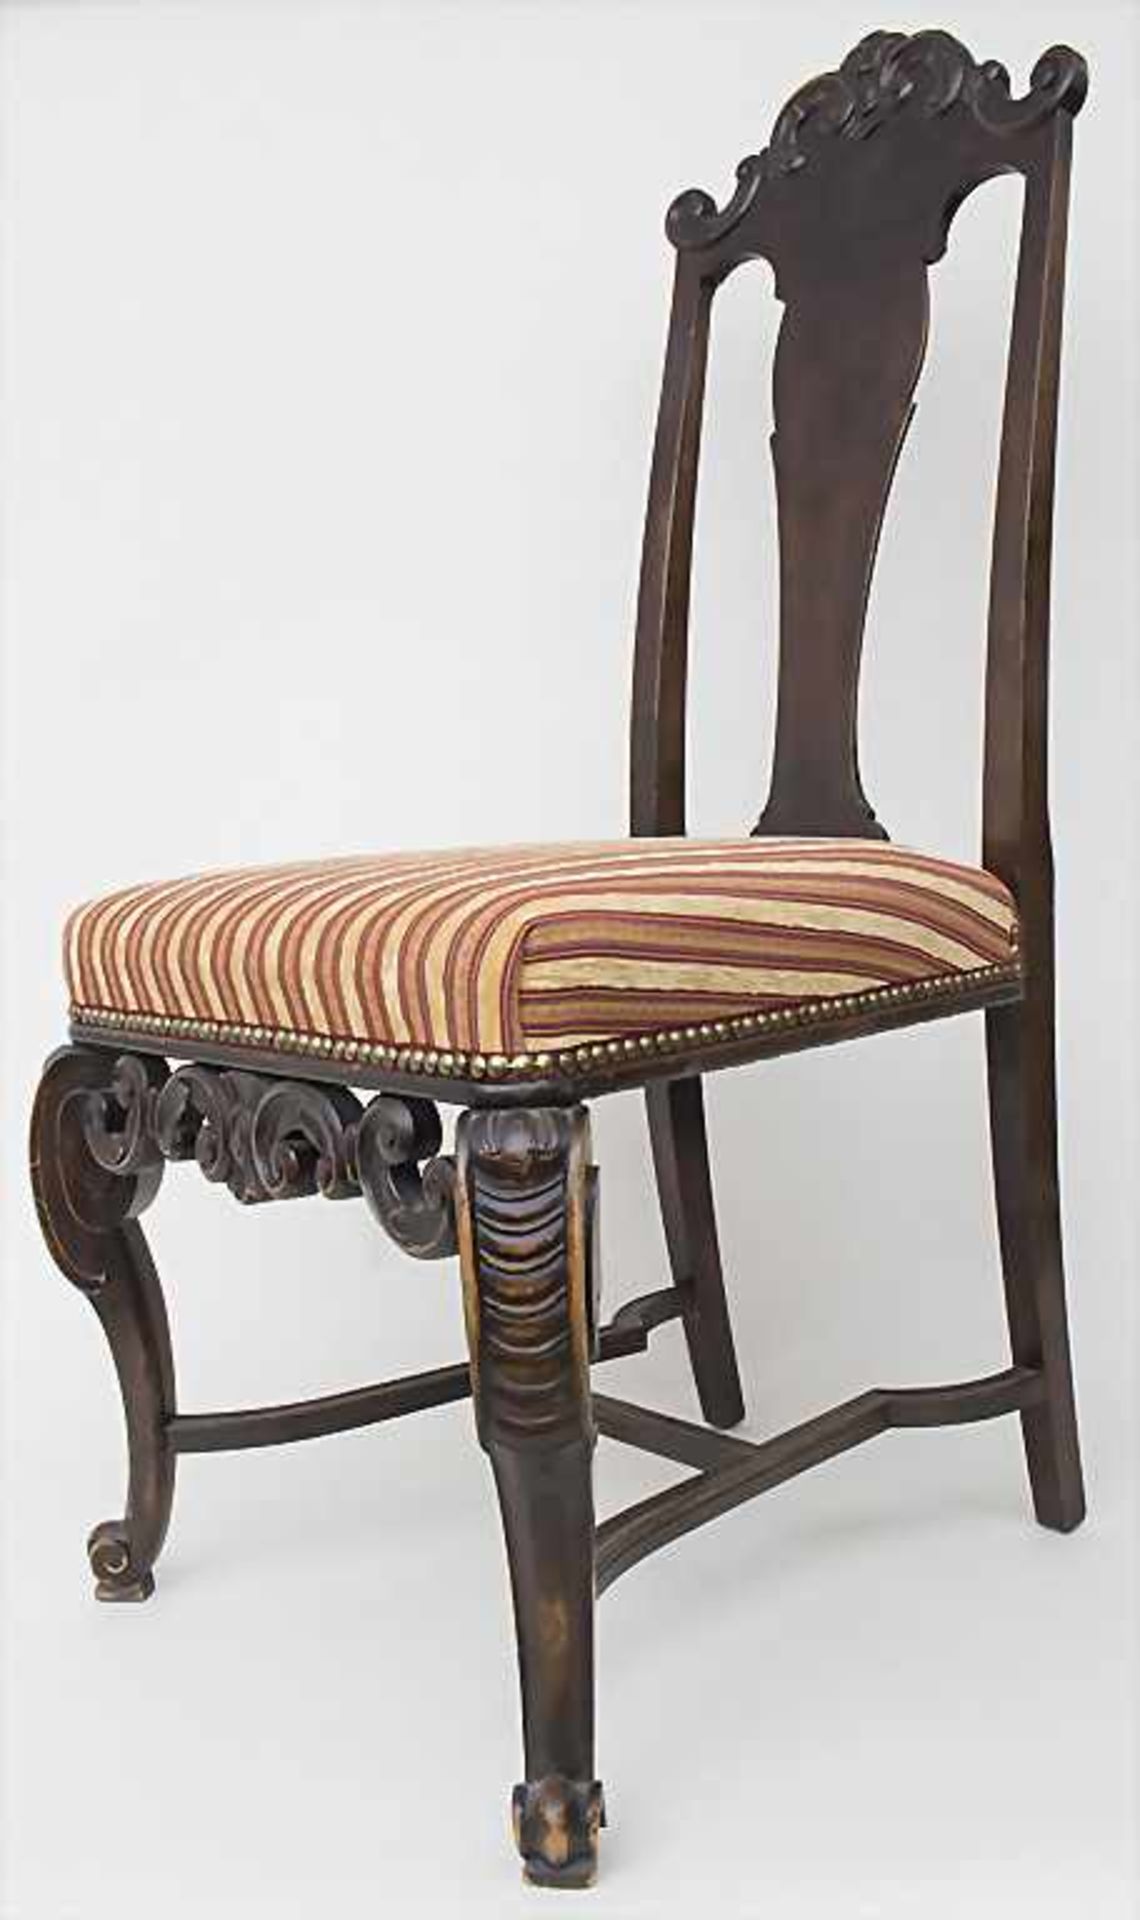 Paar Historismus-Stühle / A pair of historism chairs, 19. Jh.Material: Holz, dunkel gebeizt, - Image 2 of 5